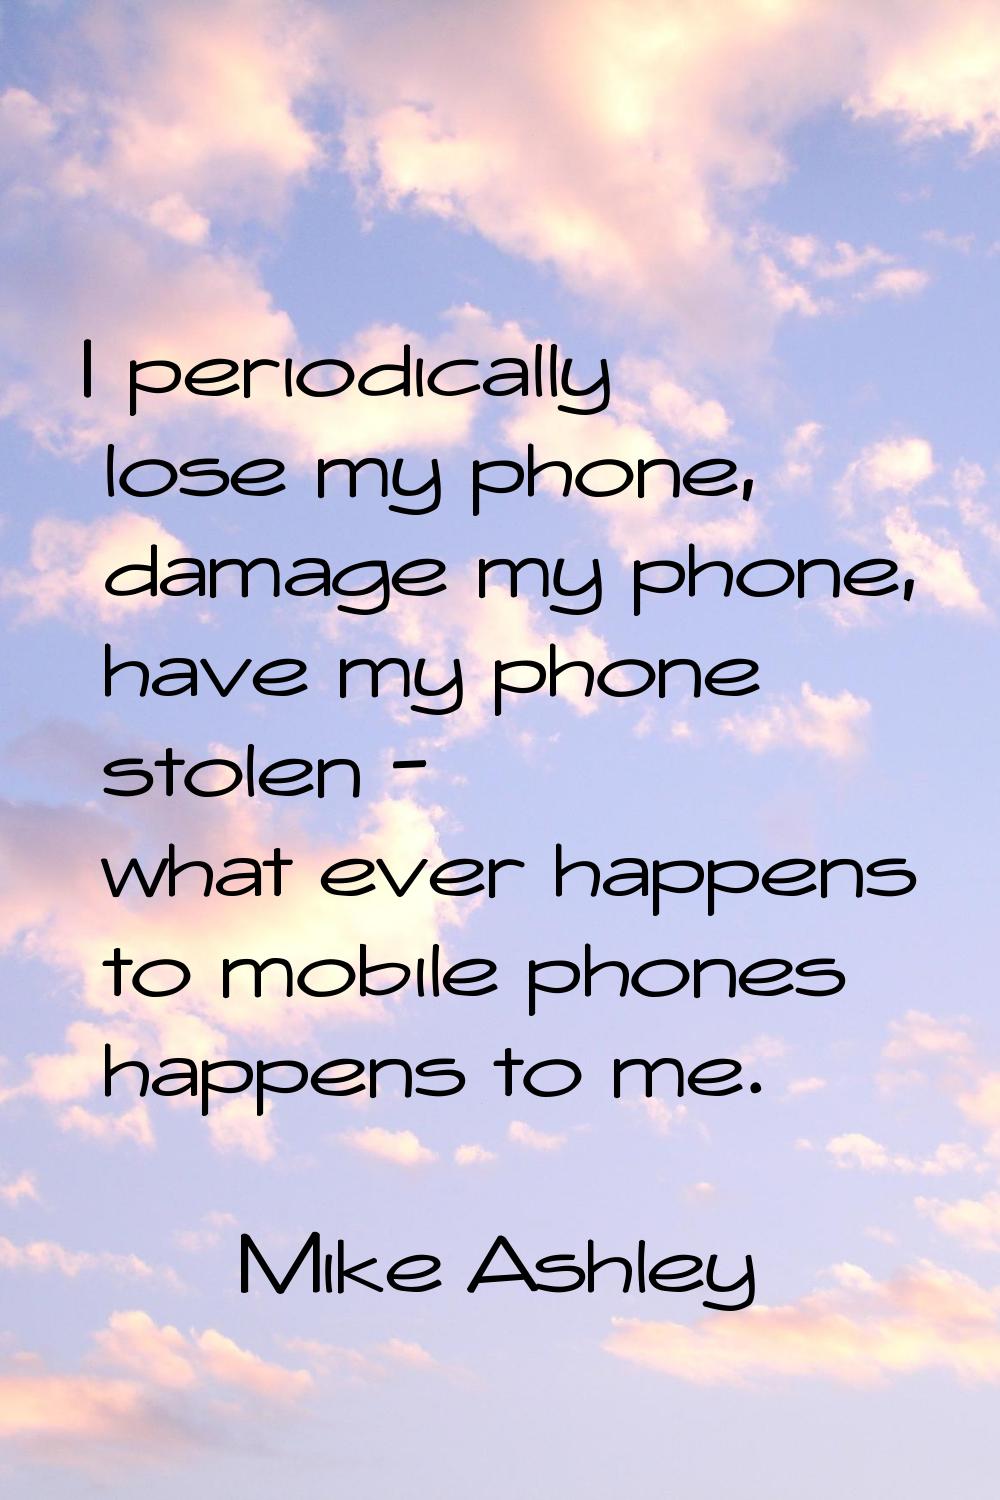 I periodically lose my phone, damage my phone, have my phone stolen - what ever happens to mobile p